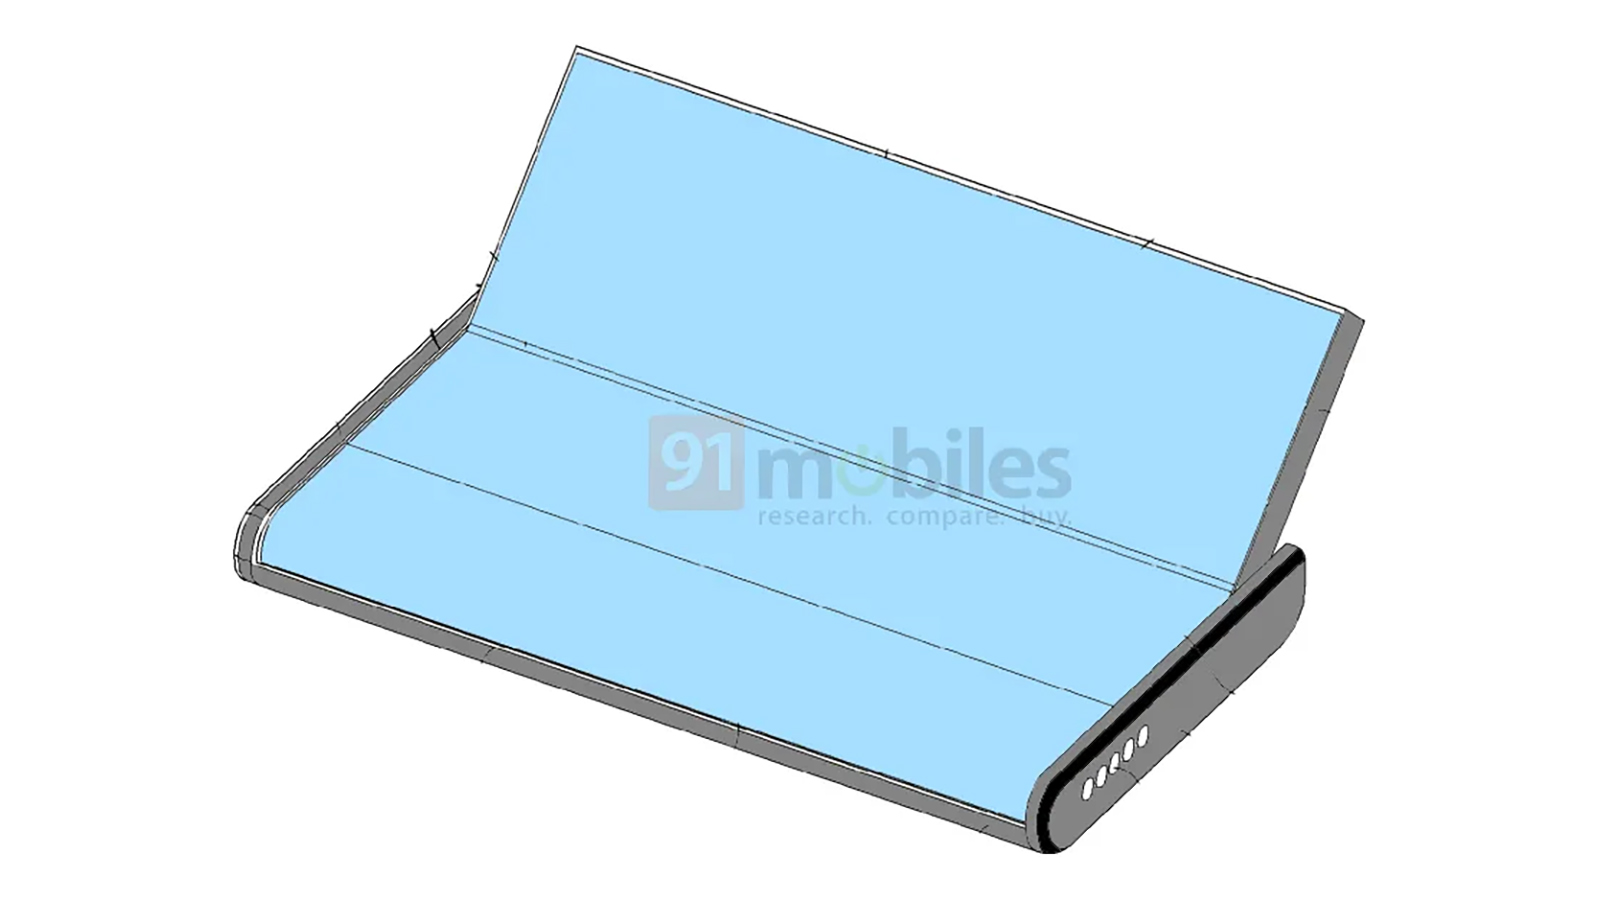 A patent diagram showing a rollable and foldable phone from Samsung.